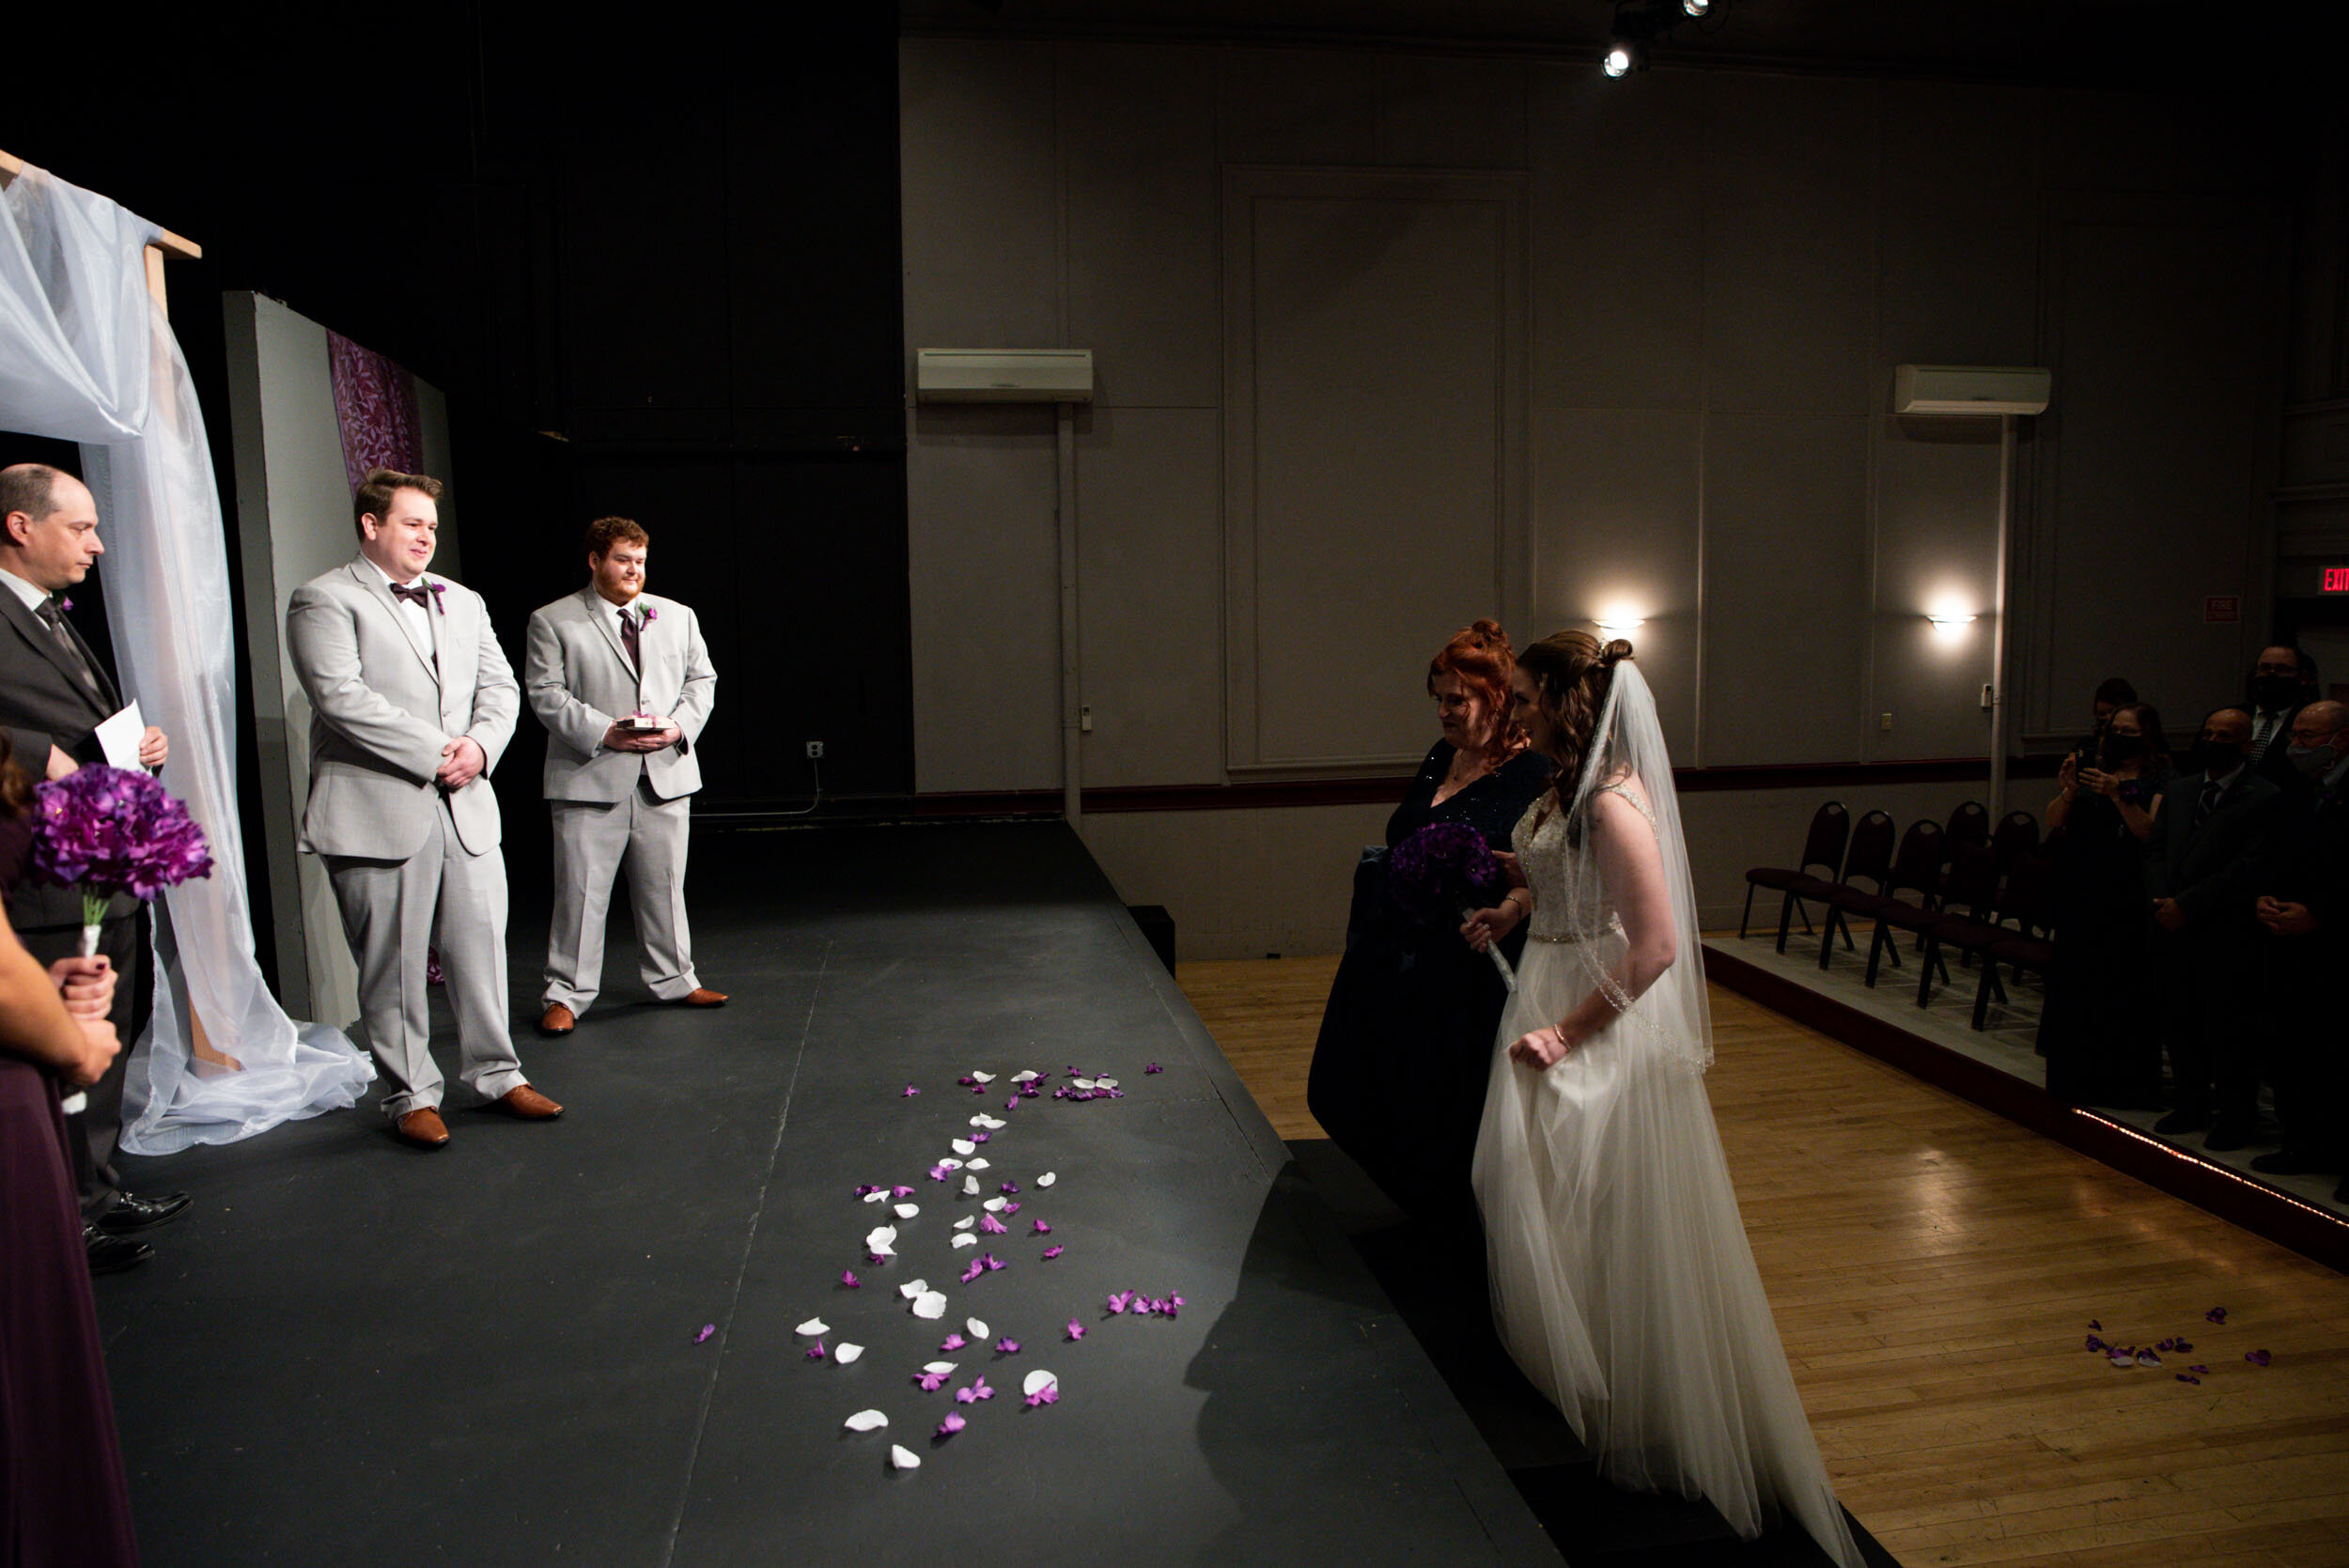 Meg and Anthony's wedding at Barre Players Theater in Barre, MA photographed by Kara Emily Krantz Photography